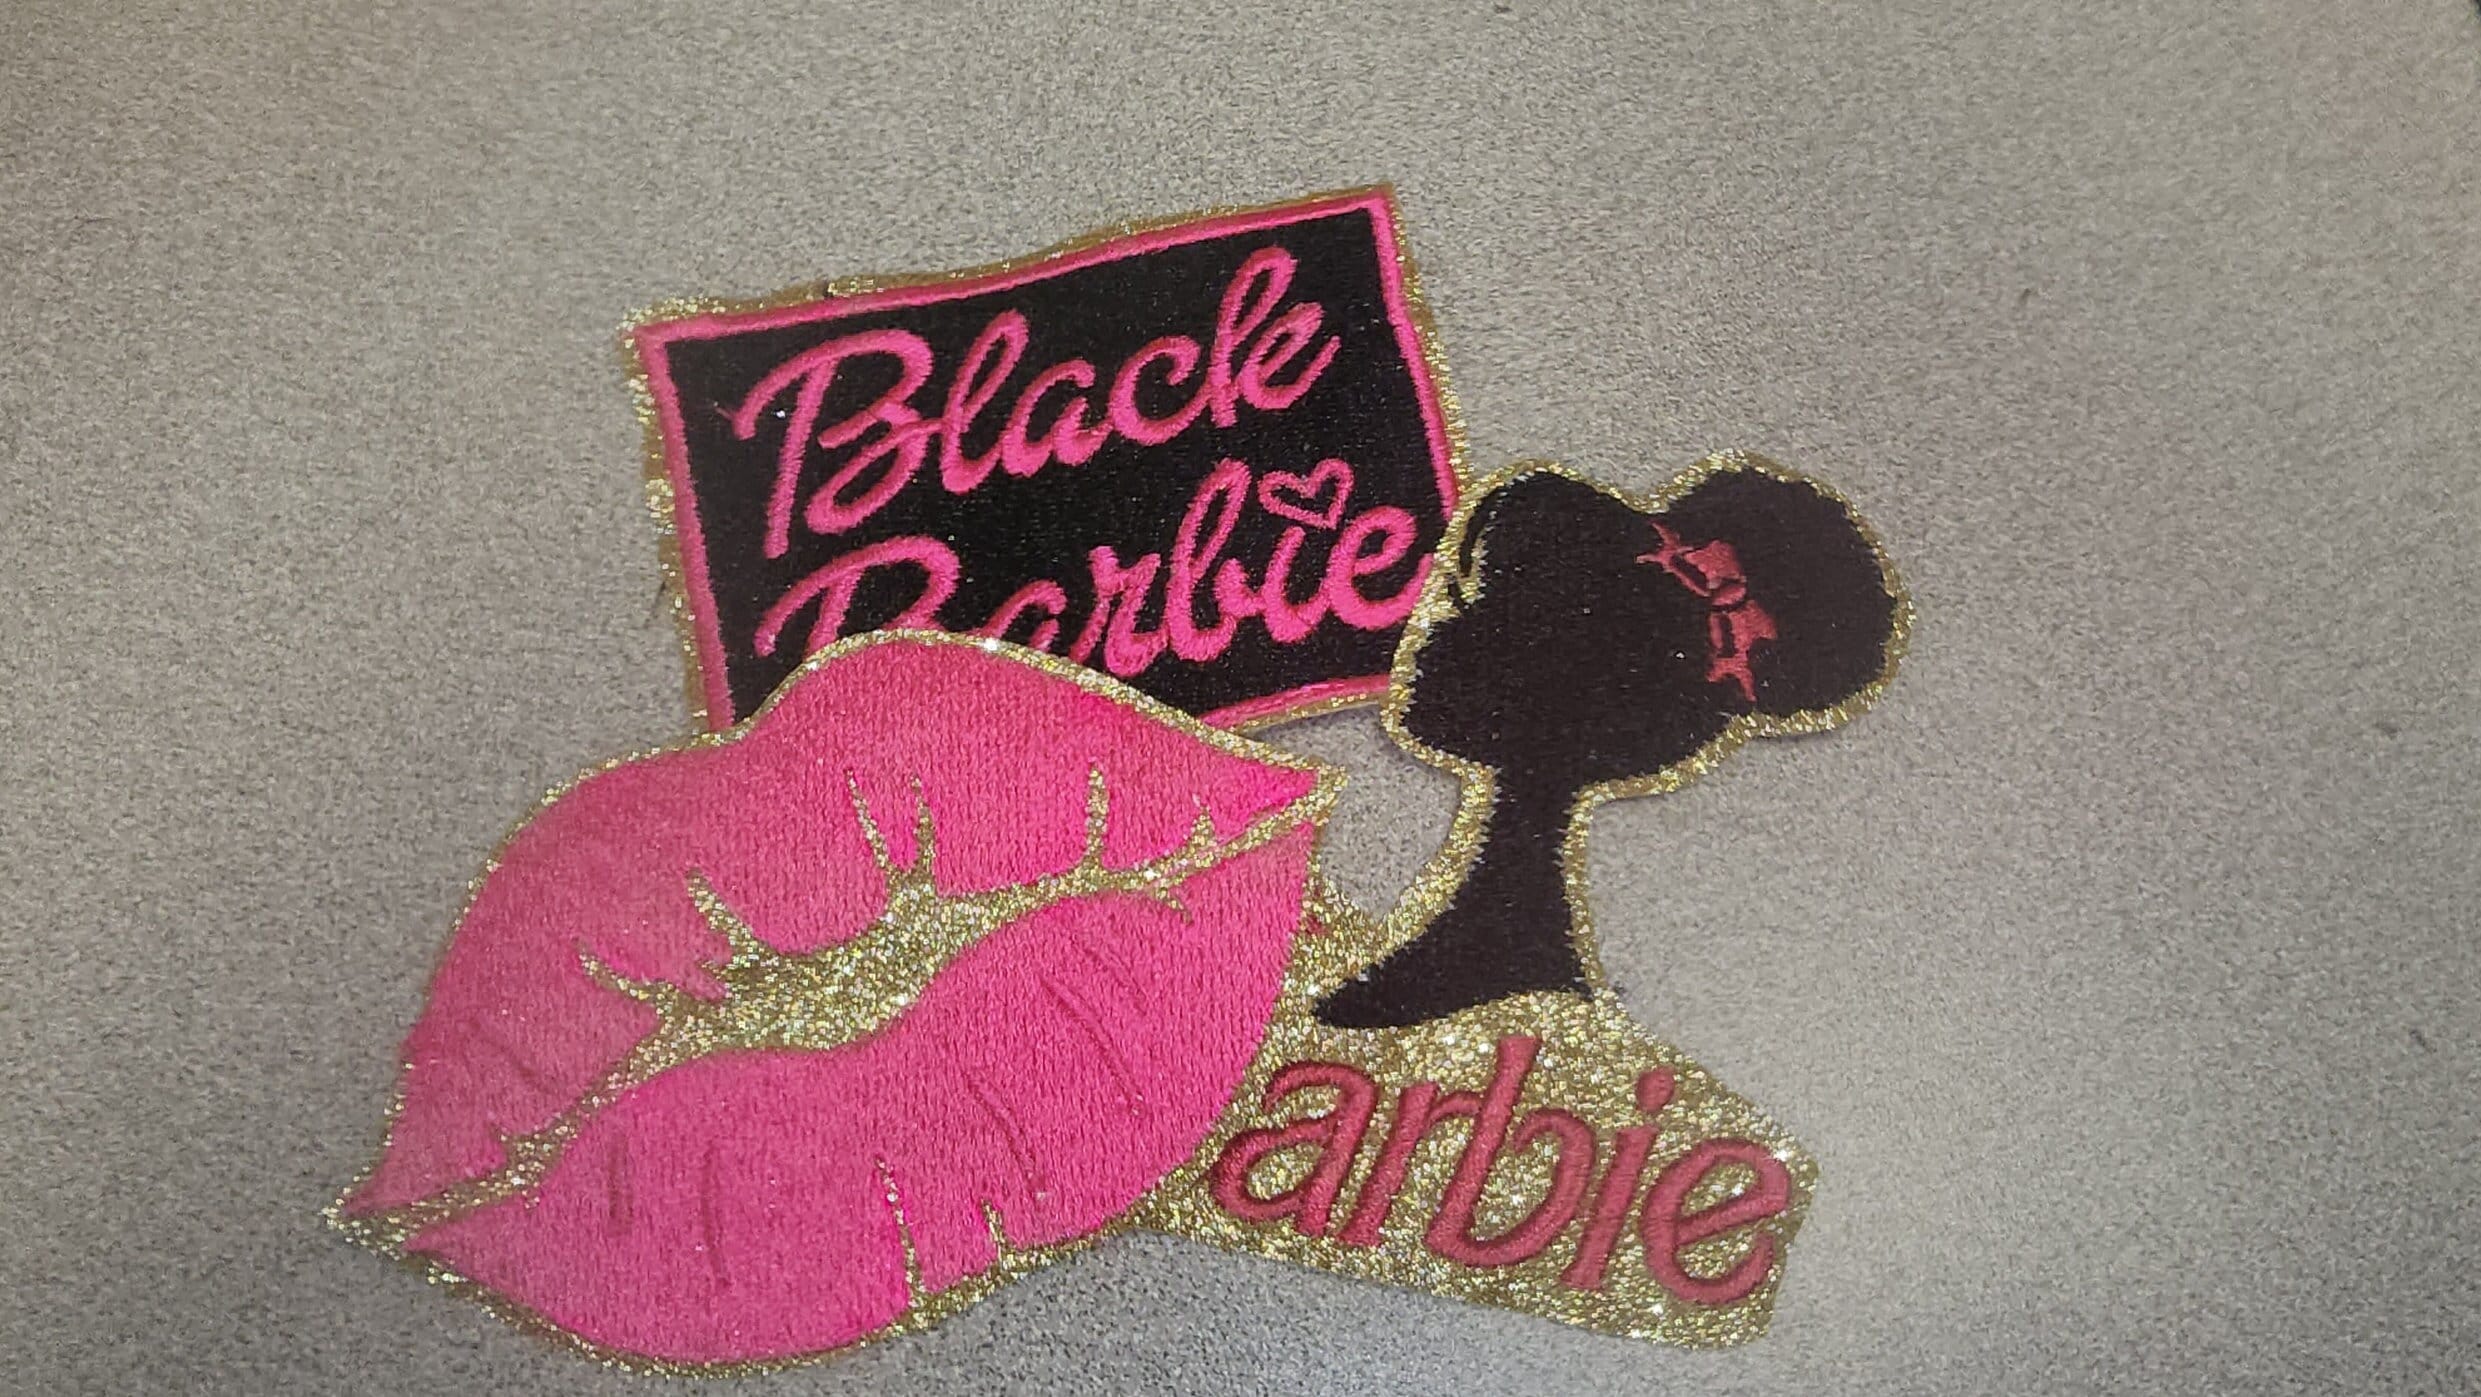 Barbie © Girl With Glasses Iron on Patches Adhesive Emblem, Size 8